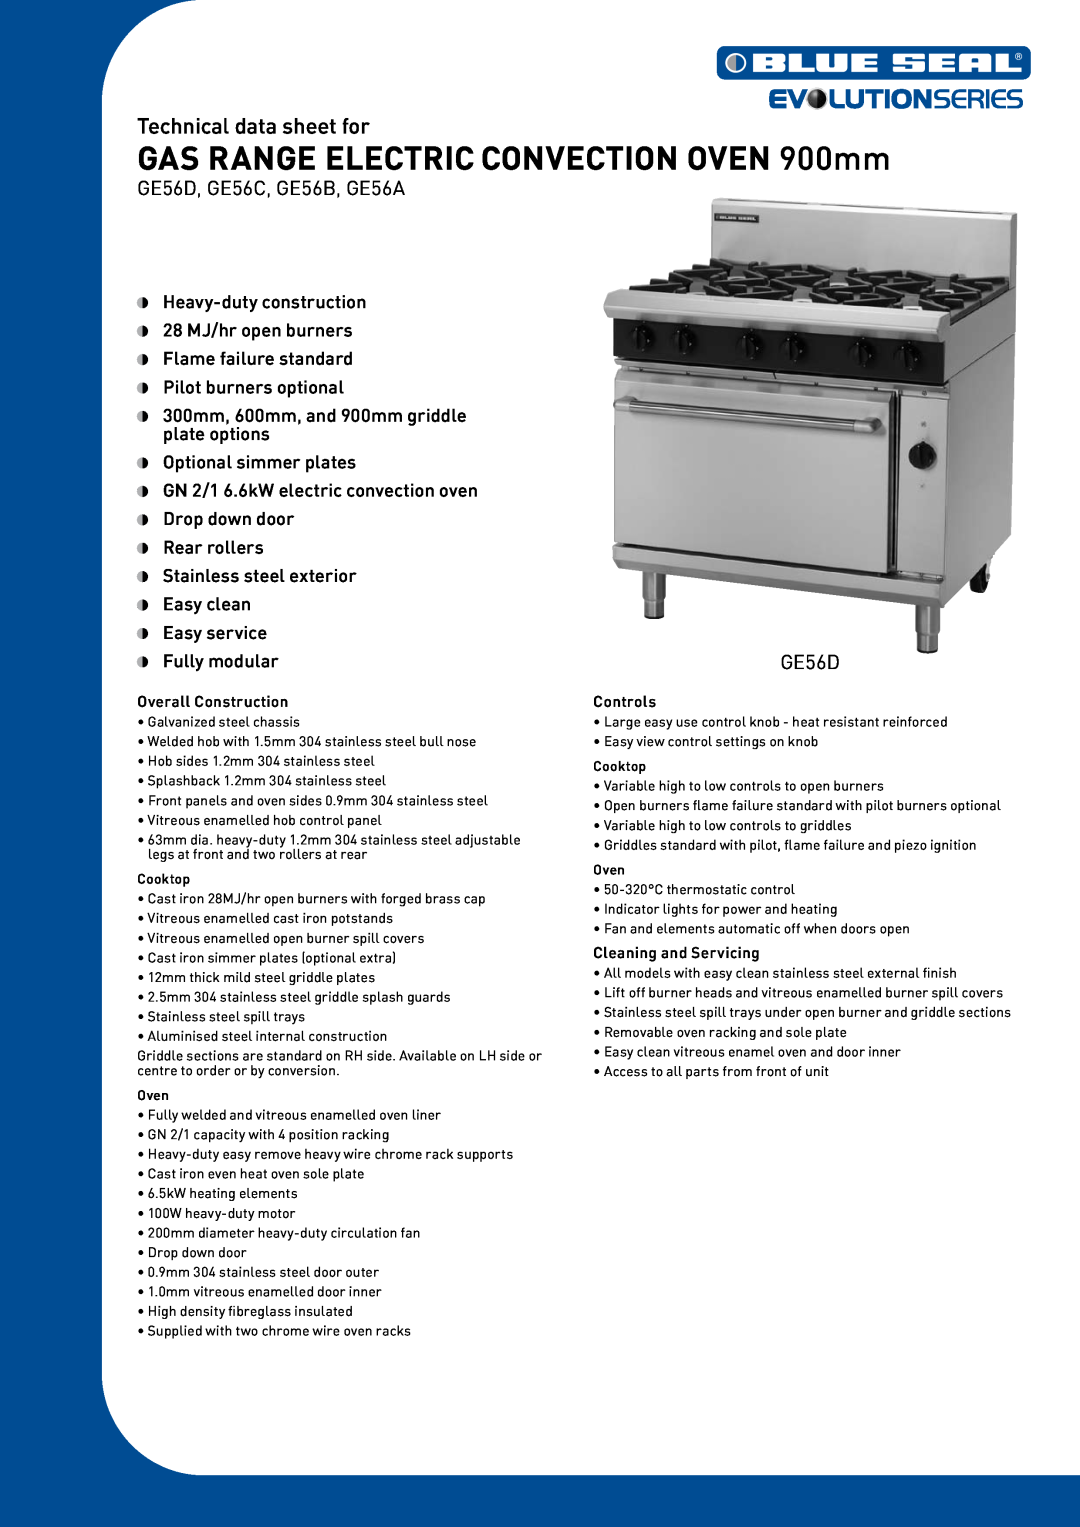 Moffat GE56A manual GAS RANGE ELECTRIC CONVECTION OVEN 900mm, Technical data sheet for, Overall Construction, Controls 